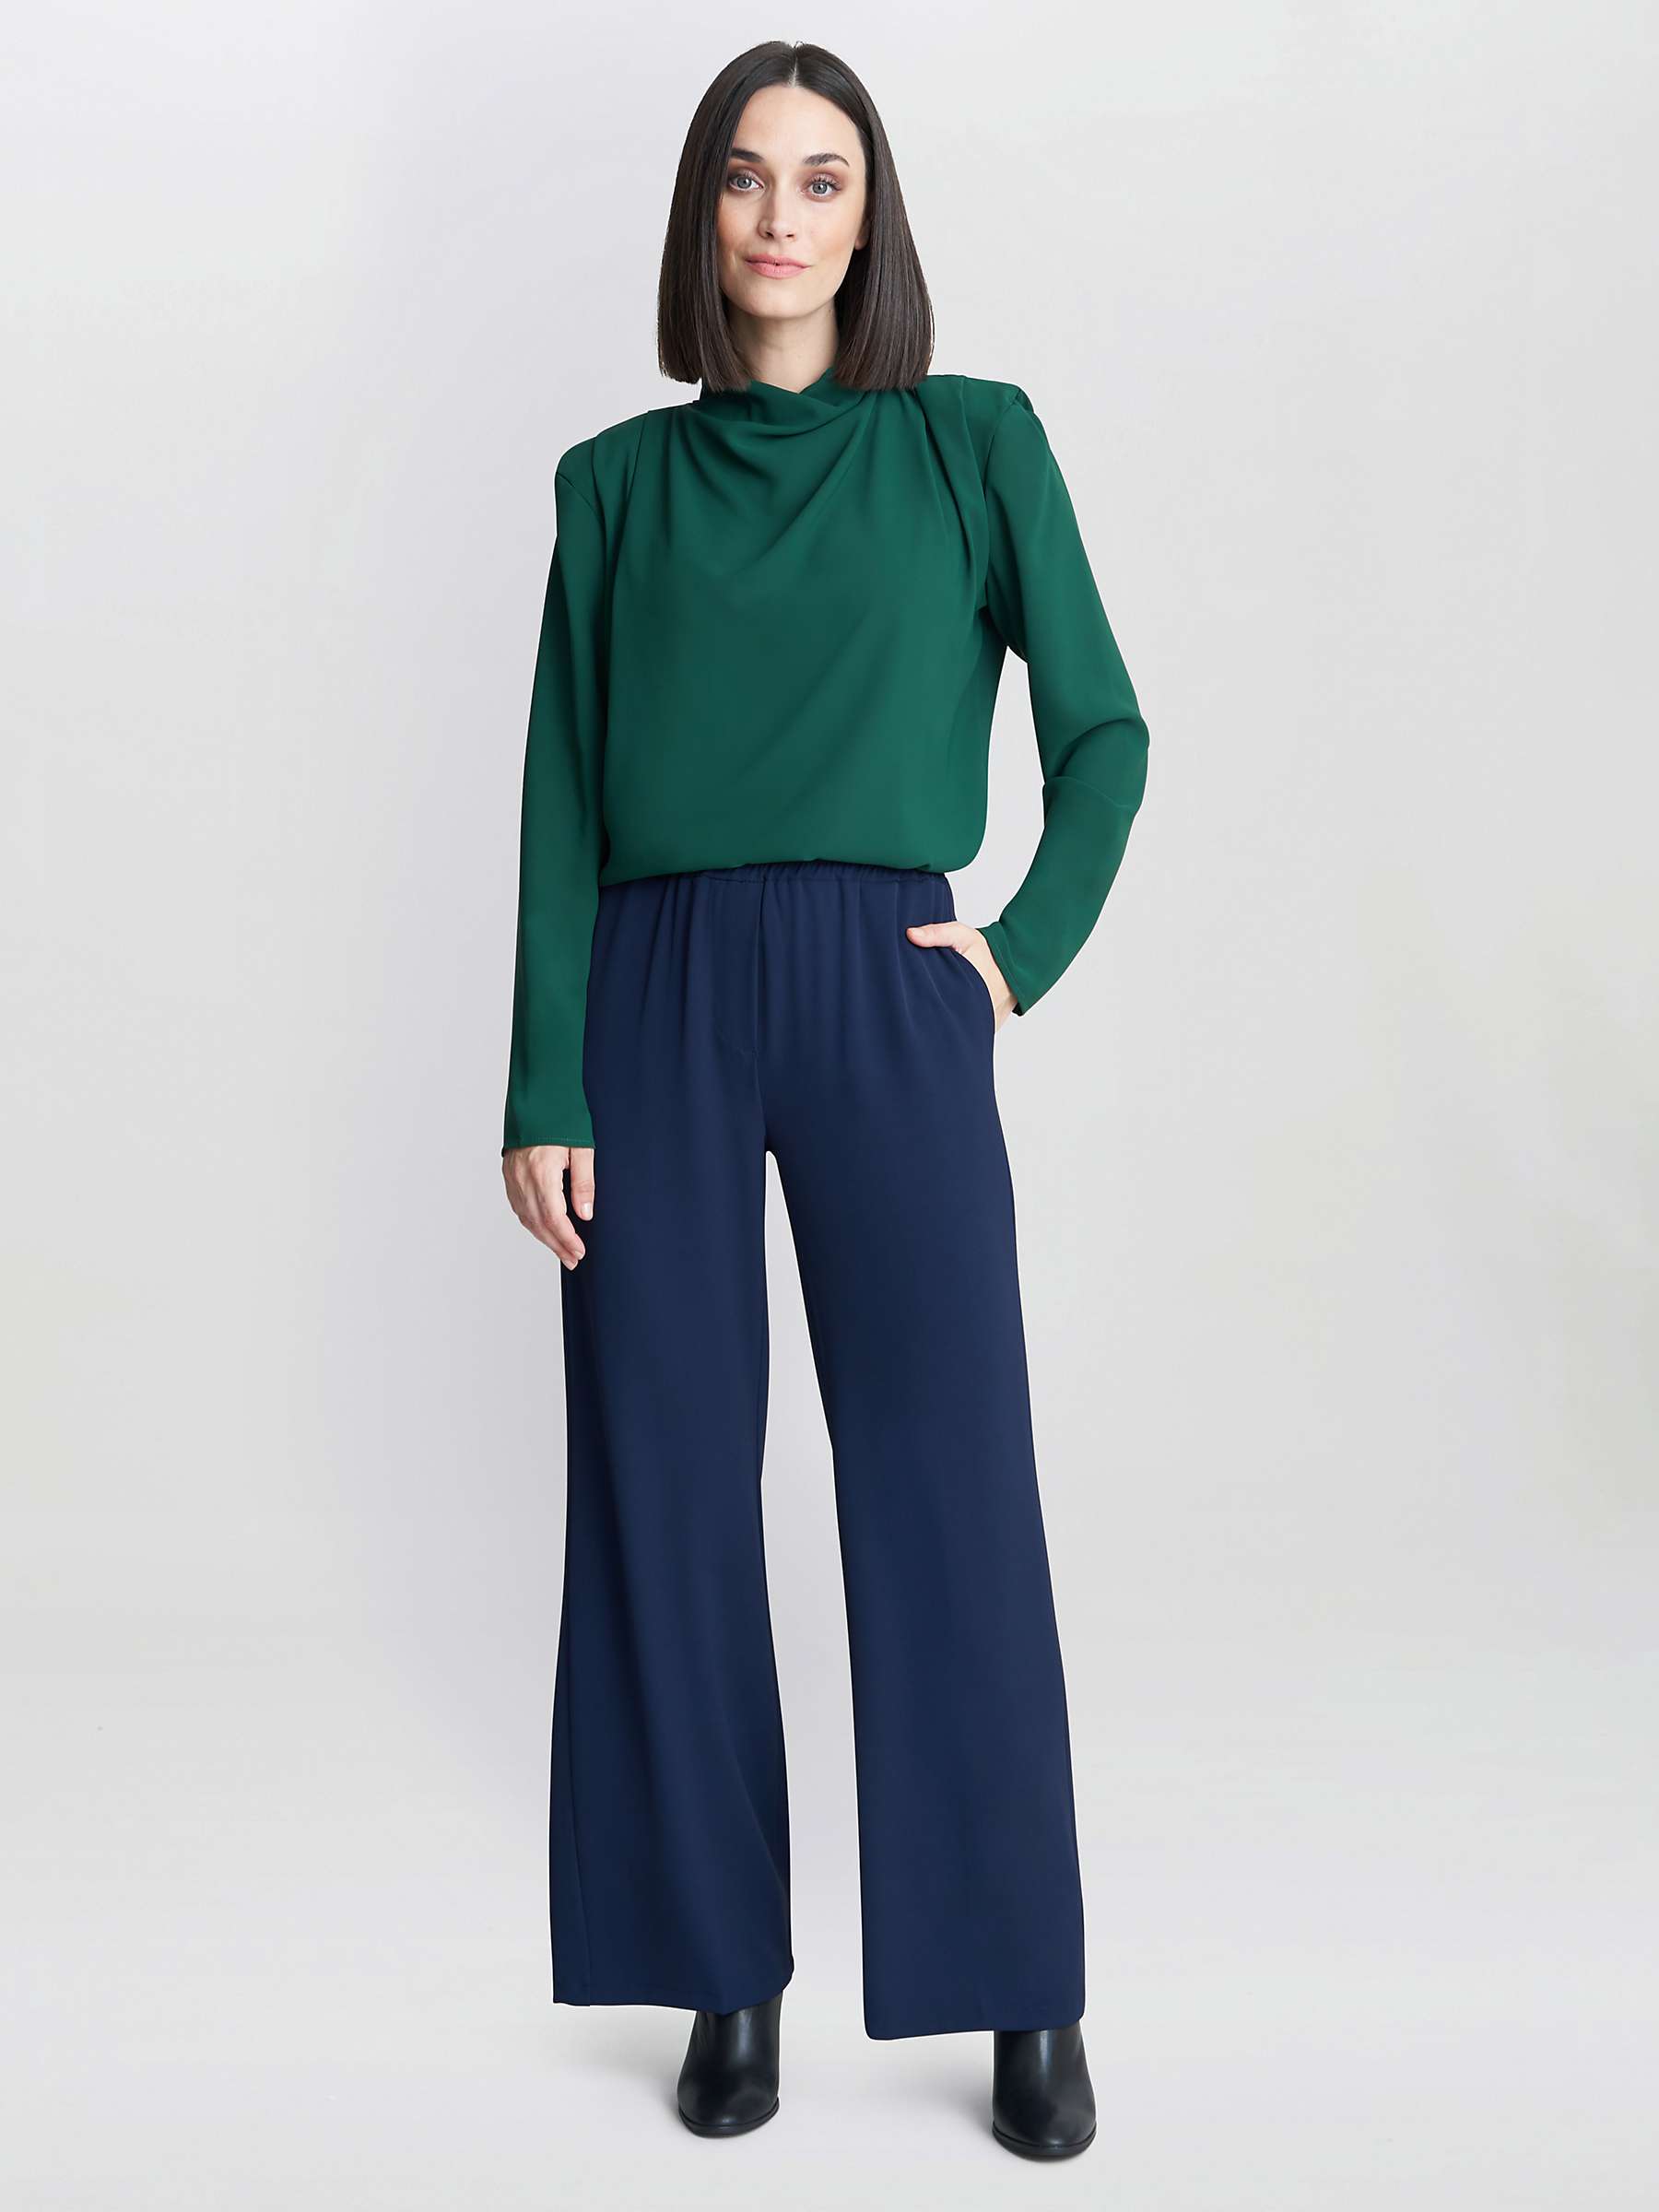 Buy Gina Bacconi  Annika Crepe Pull On Trousers Online at johnlewis.com